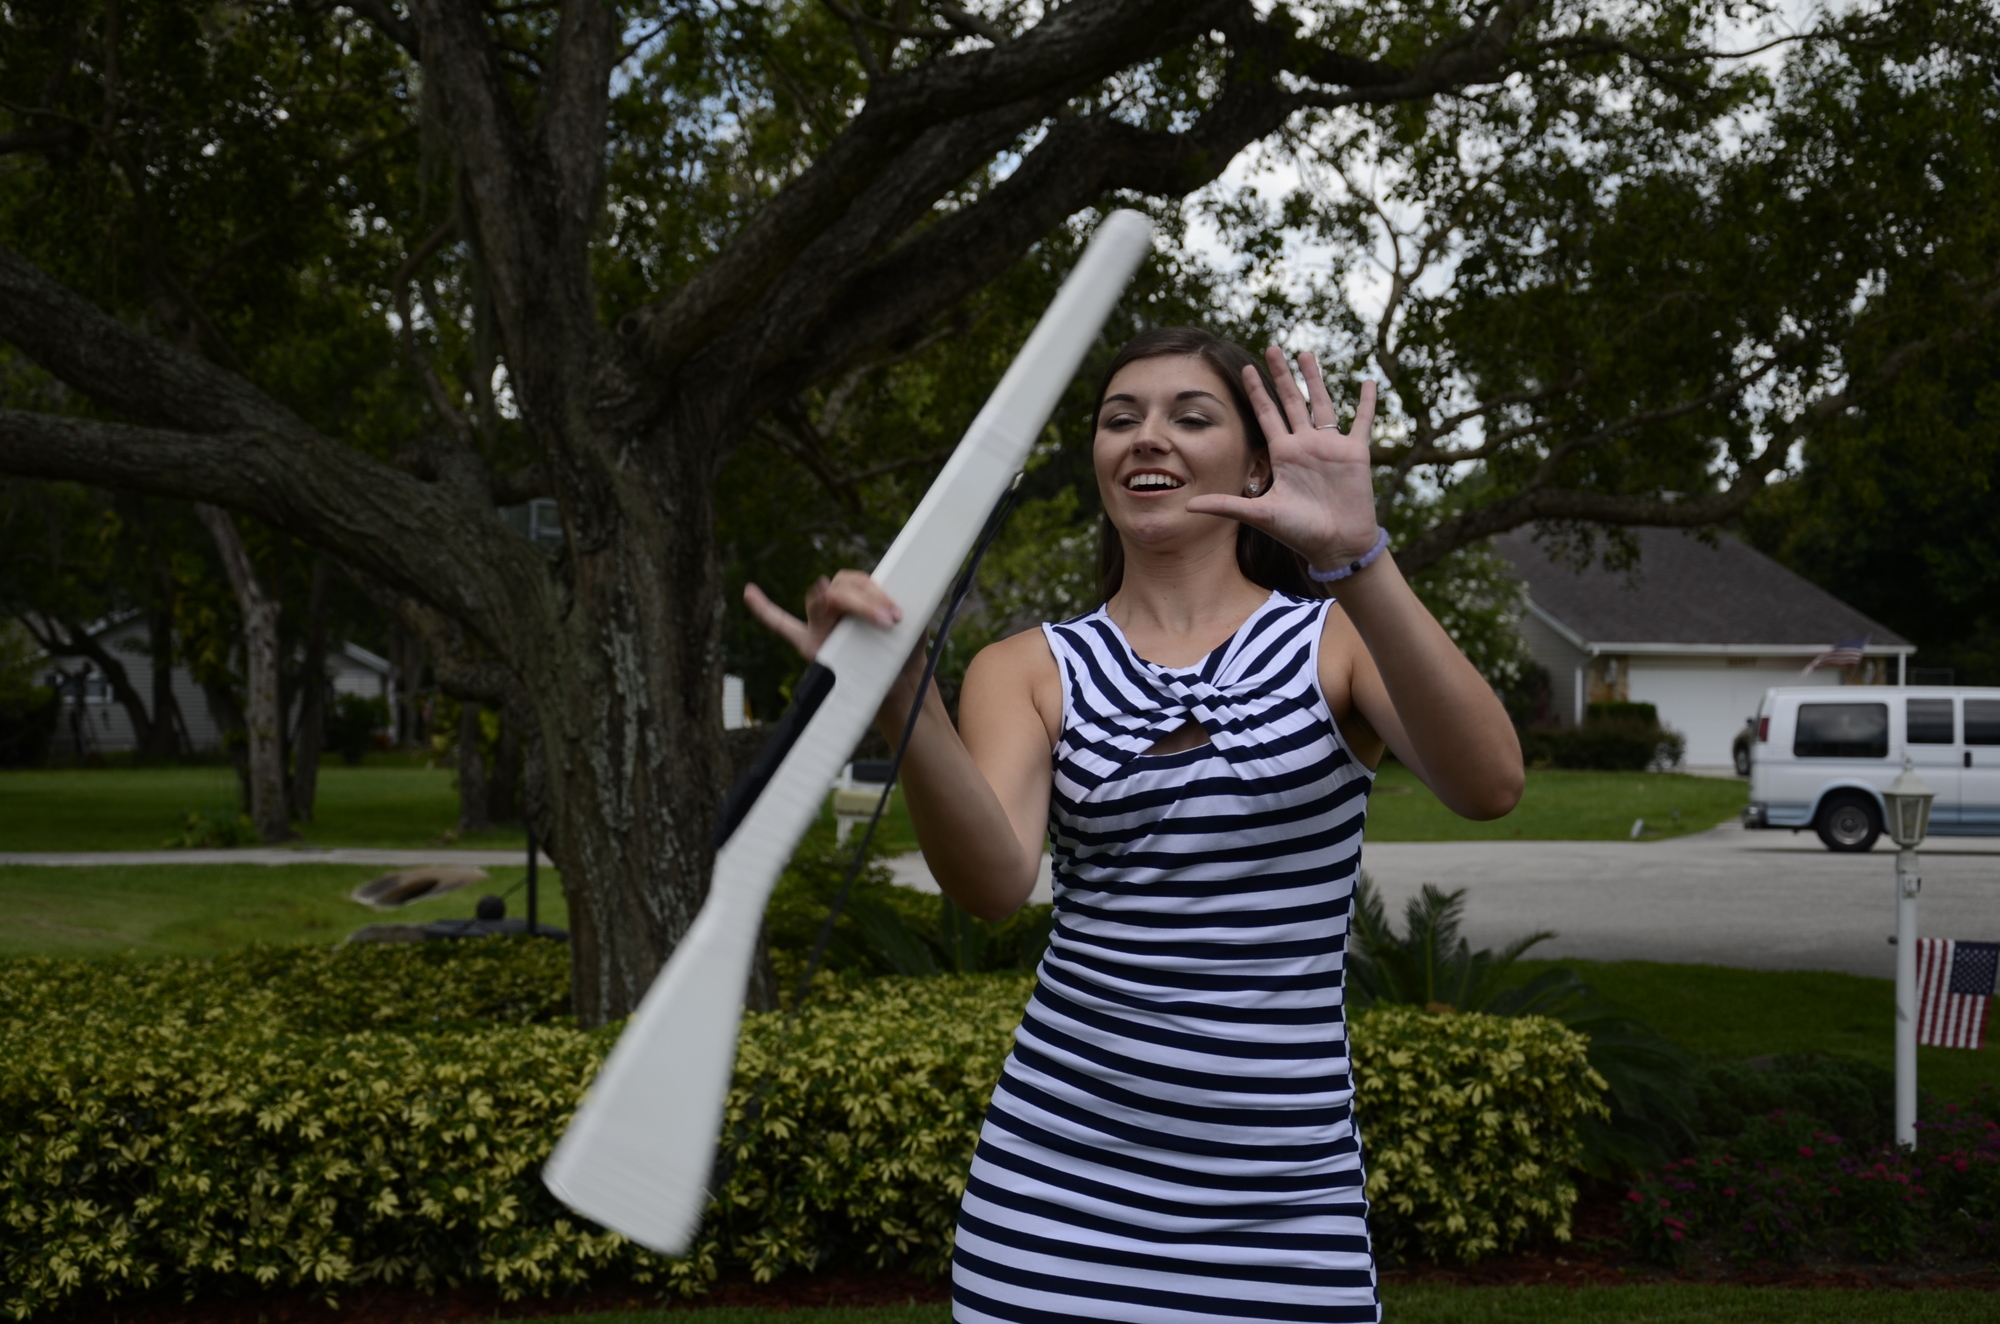 Samantha Hyatt served on the color guard in high school and is on the rifle line at University of Florida. She does a rifle twirling routine as her talent at pageants.